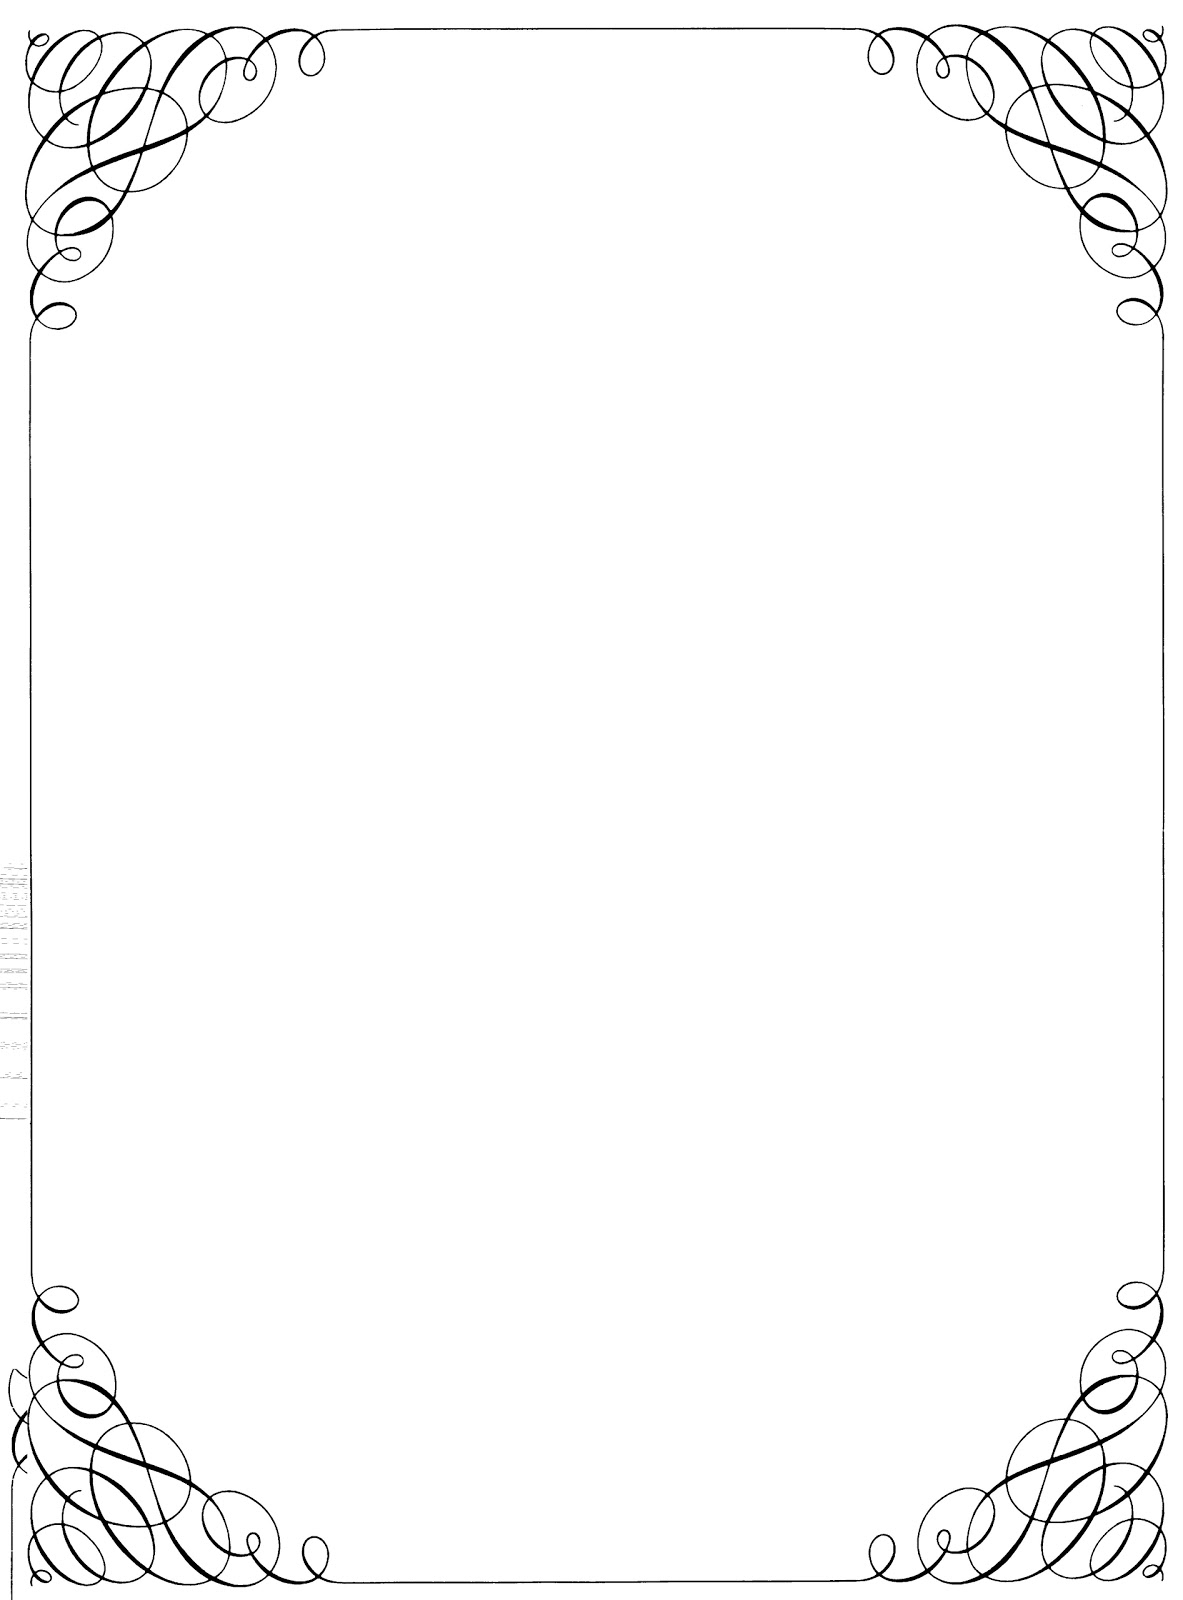 free download clip art borders and frames - photo #18